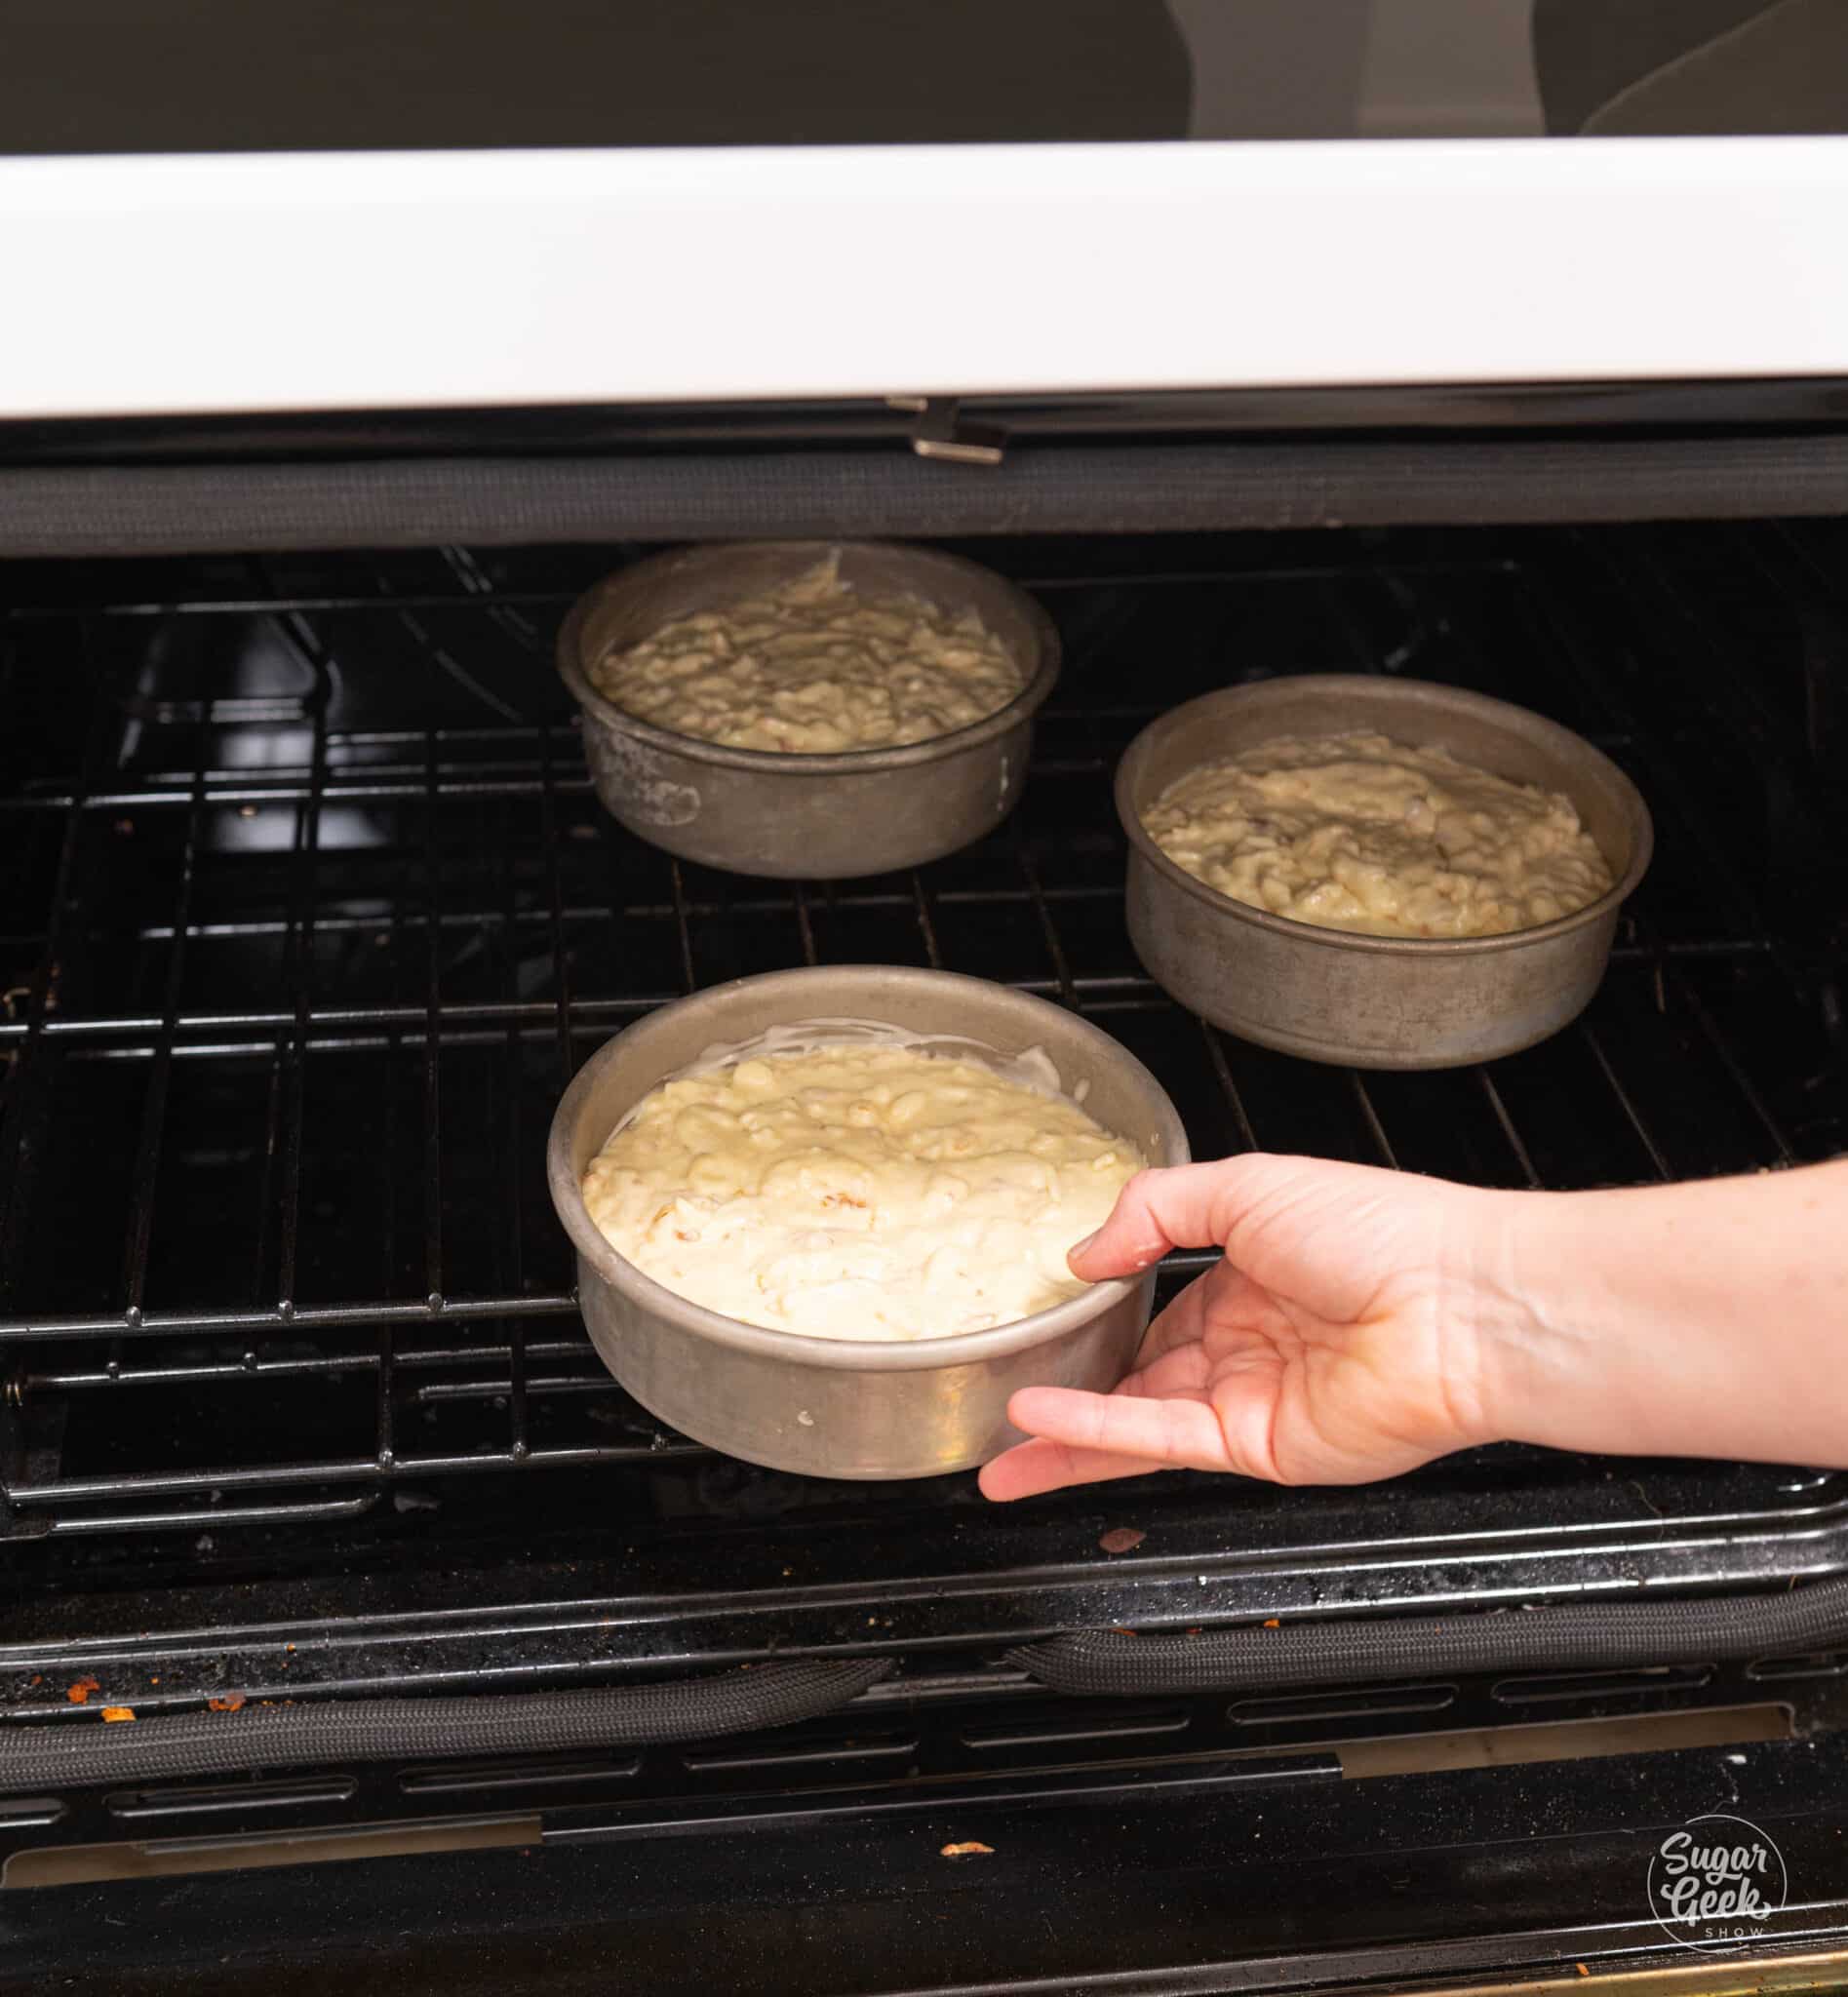 hand placing a cake pan with batter into an oven